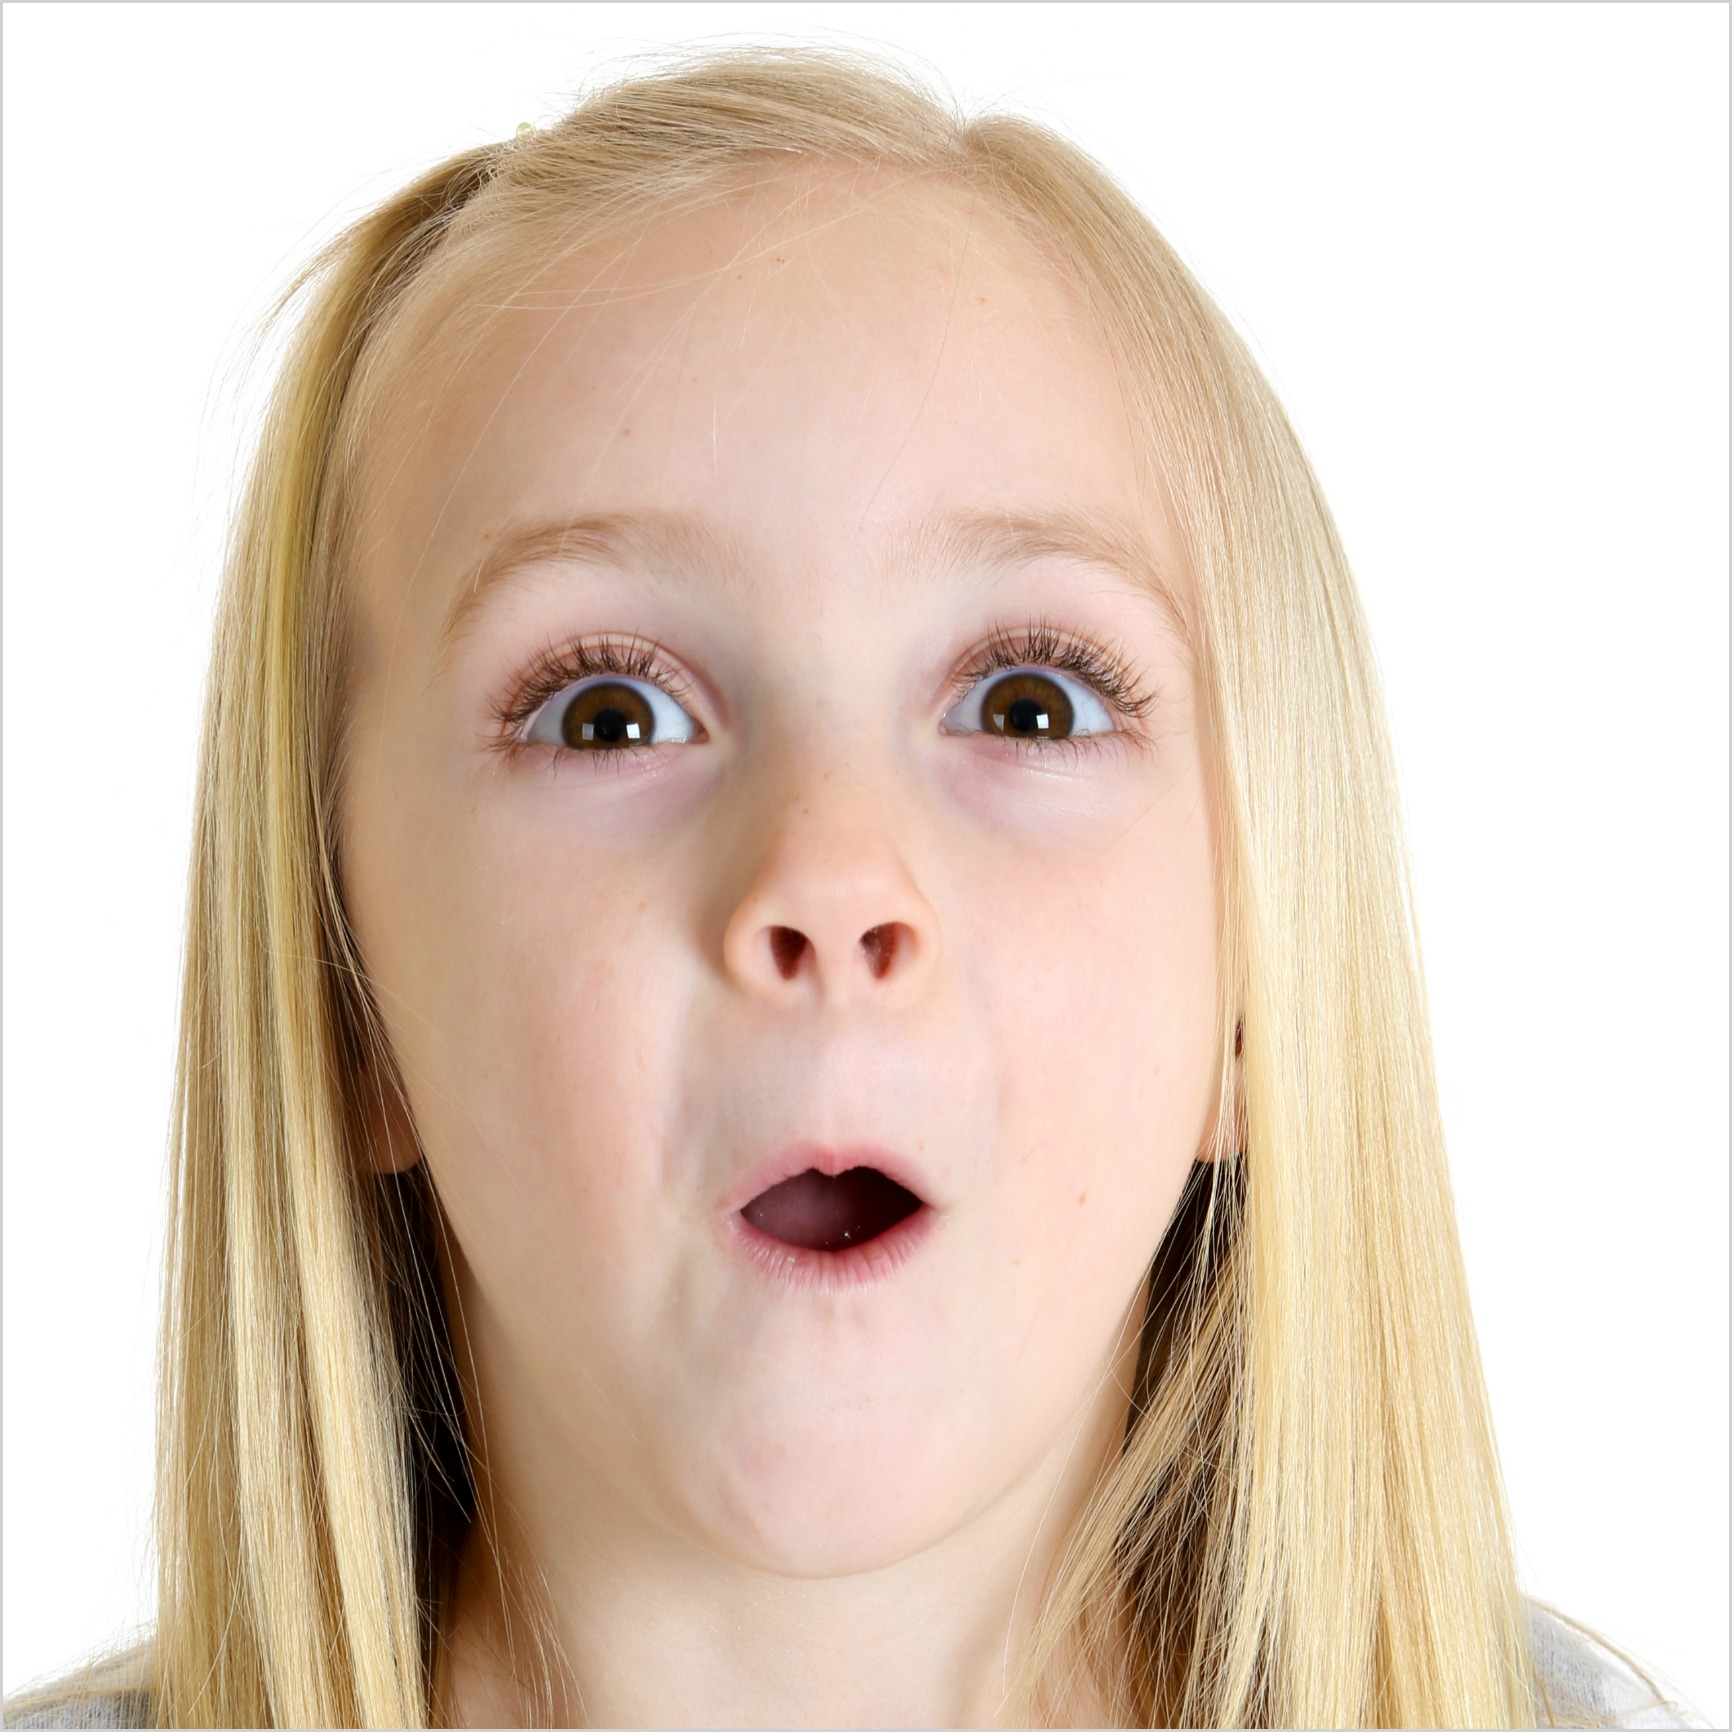 4 Surprising Words Kids Should Say Every Day